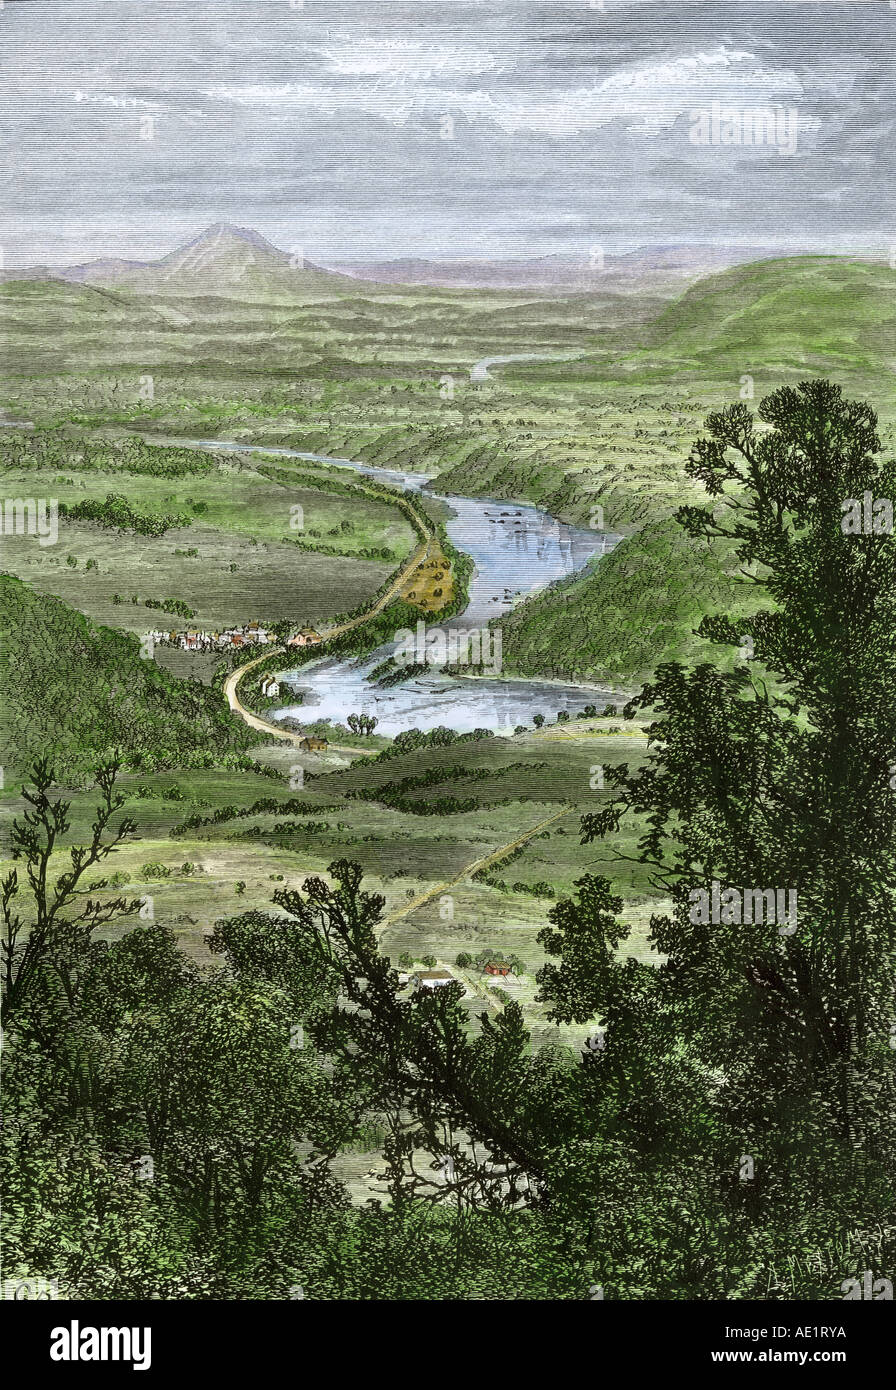 Potomac River near Harpers Ferry WV, seen from Maryland Heights 1800s. Hand-colored woodcut Stock Photo